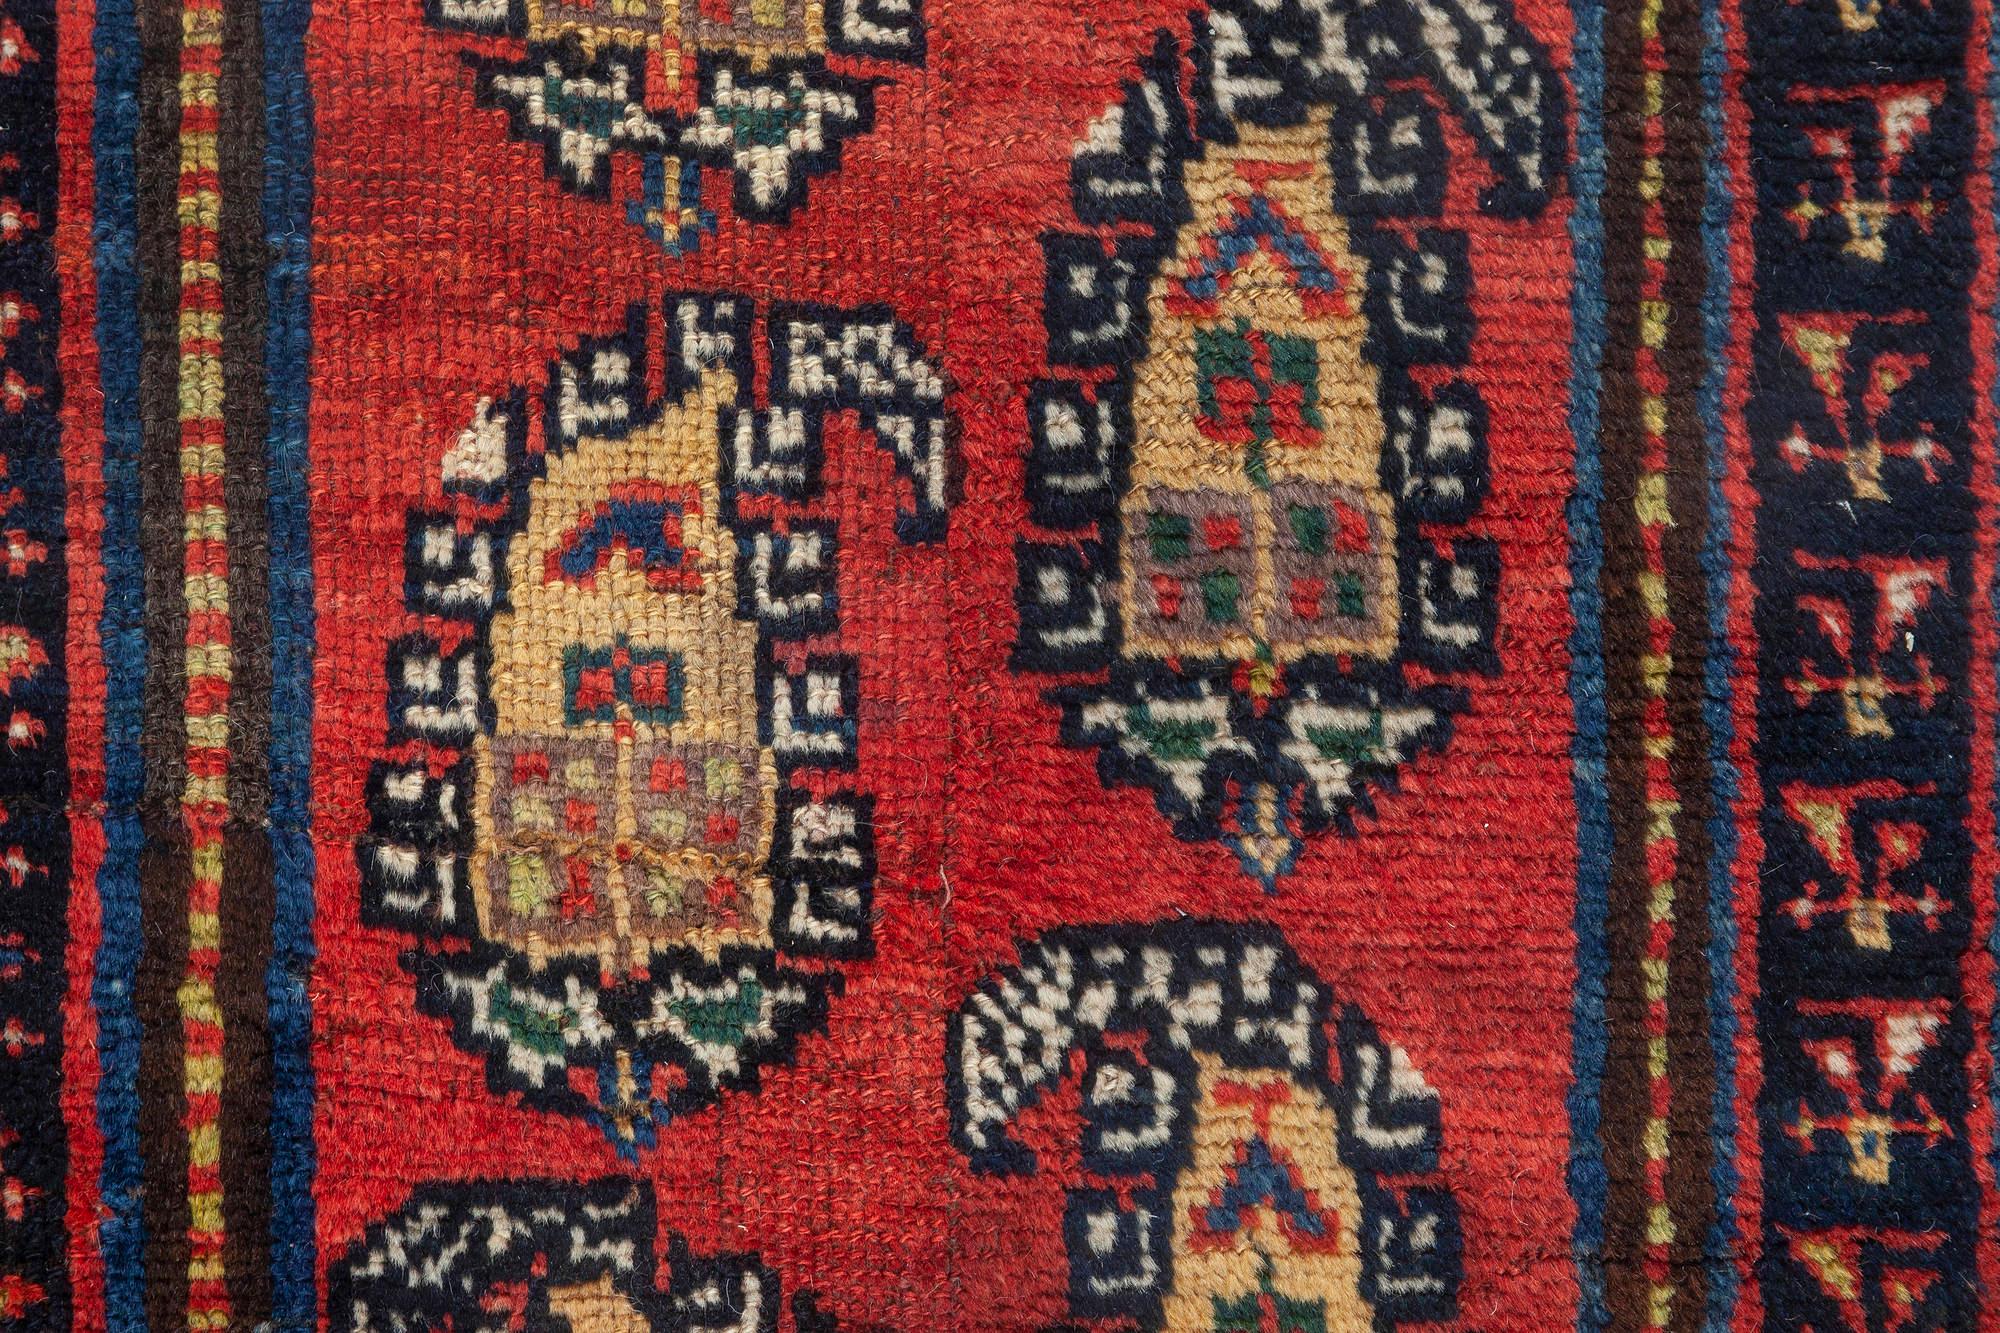 Antique Persian Bakhtiari blue, red and yellow runner fragment rug
Size: 1'9